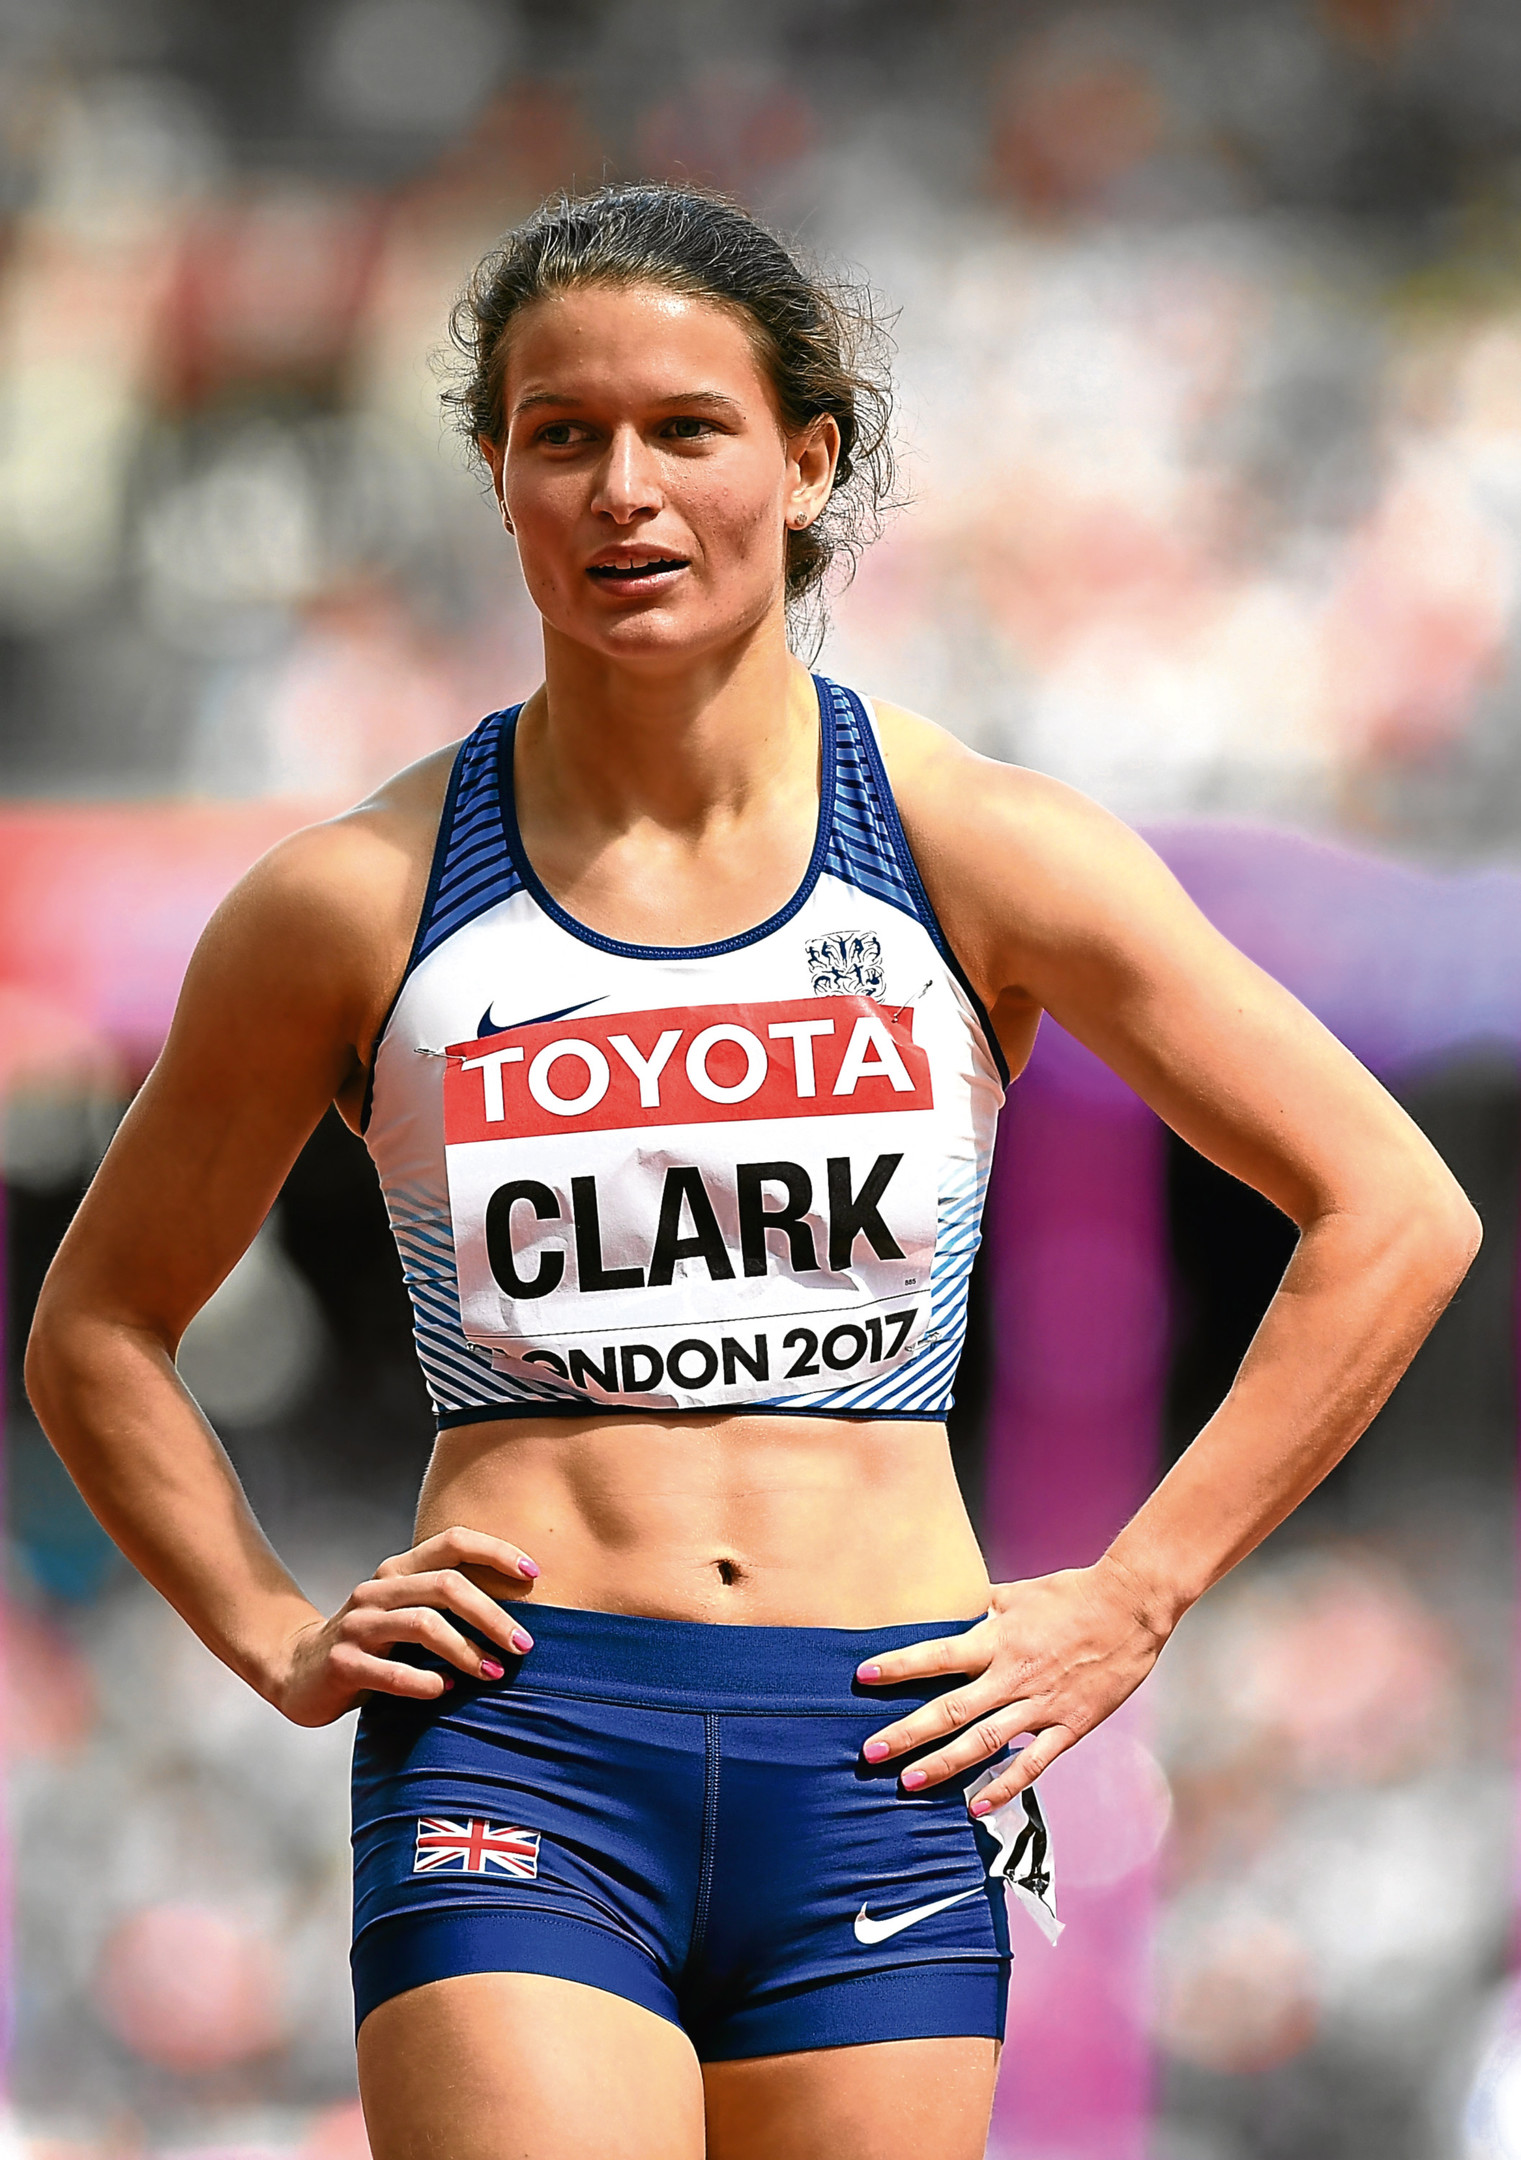 LONDON, ENGLAND - AUGUST 06:  Zoey Clark of Great Britain reacts after competing in the Women's 400 metres heats during day three of the 16th IAAF World Athletics Championships London 2017 at The London Stadium on August 6, 2017 in London, United Kingdom.  (Photo by David Ramos/Getty Images)